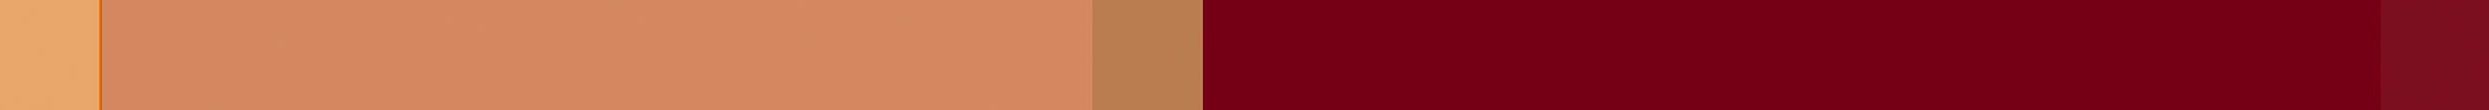 Color Line Progression from Coral to Maroon | Contact Neighborly Home Care for Elderly Care in Delaware County